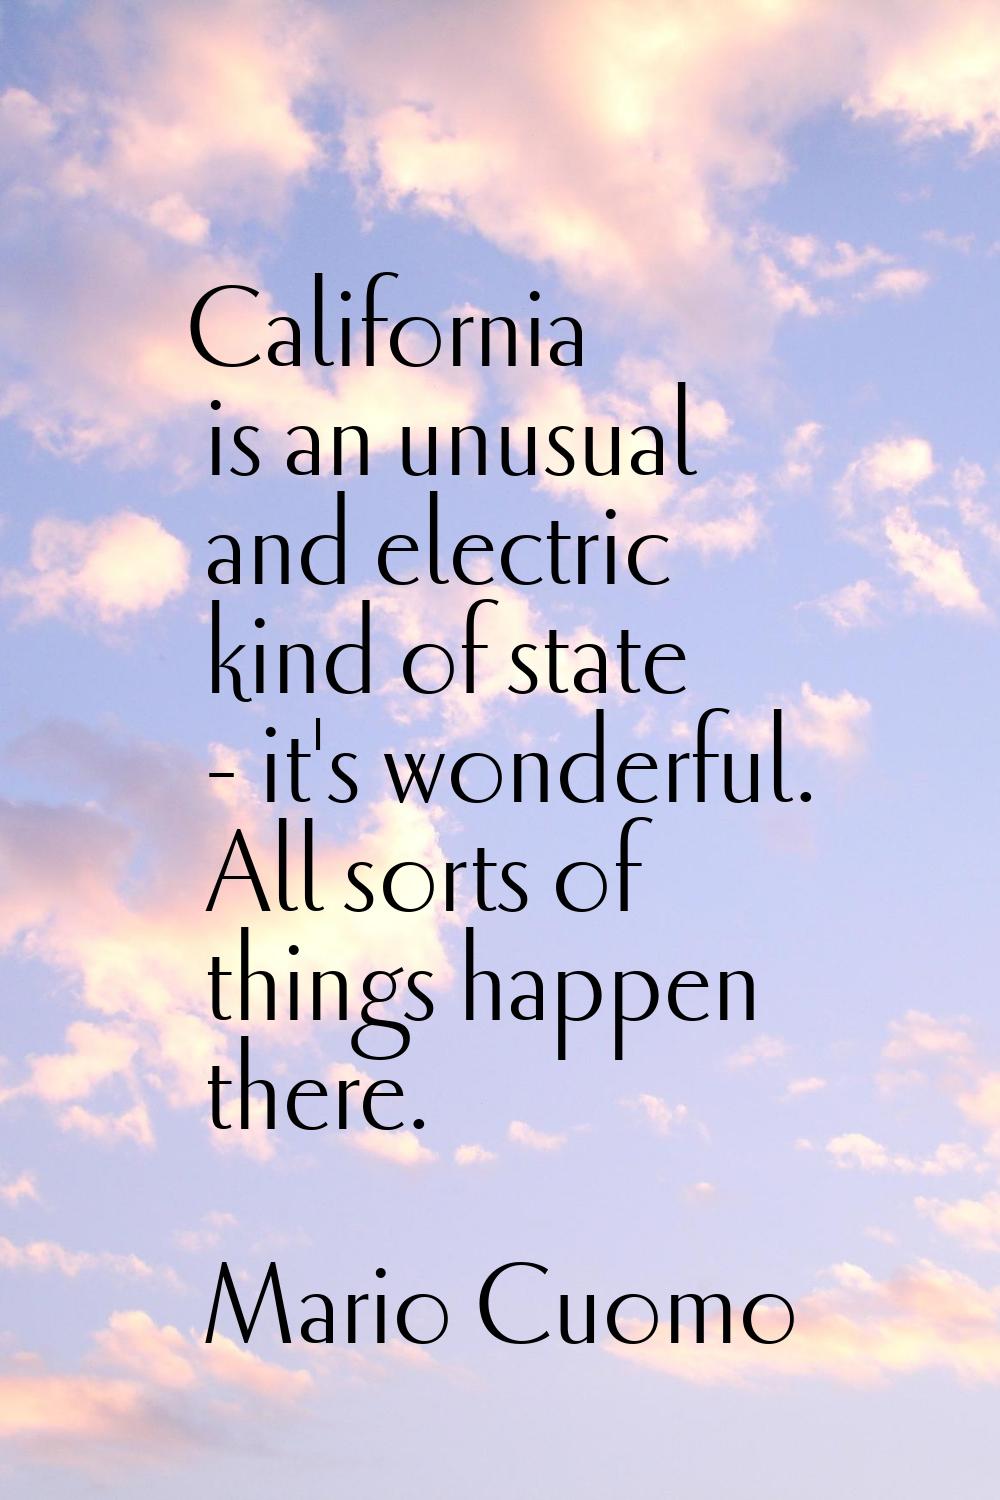 California is an unusual and electric kind of state - it's wonderful. All sorts of things happen th